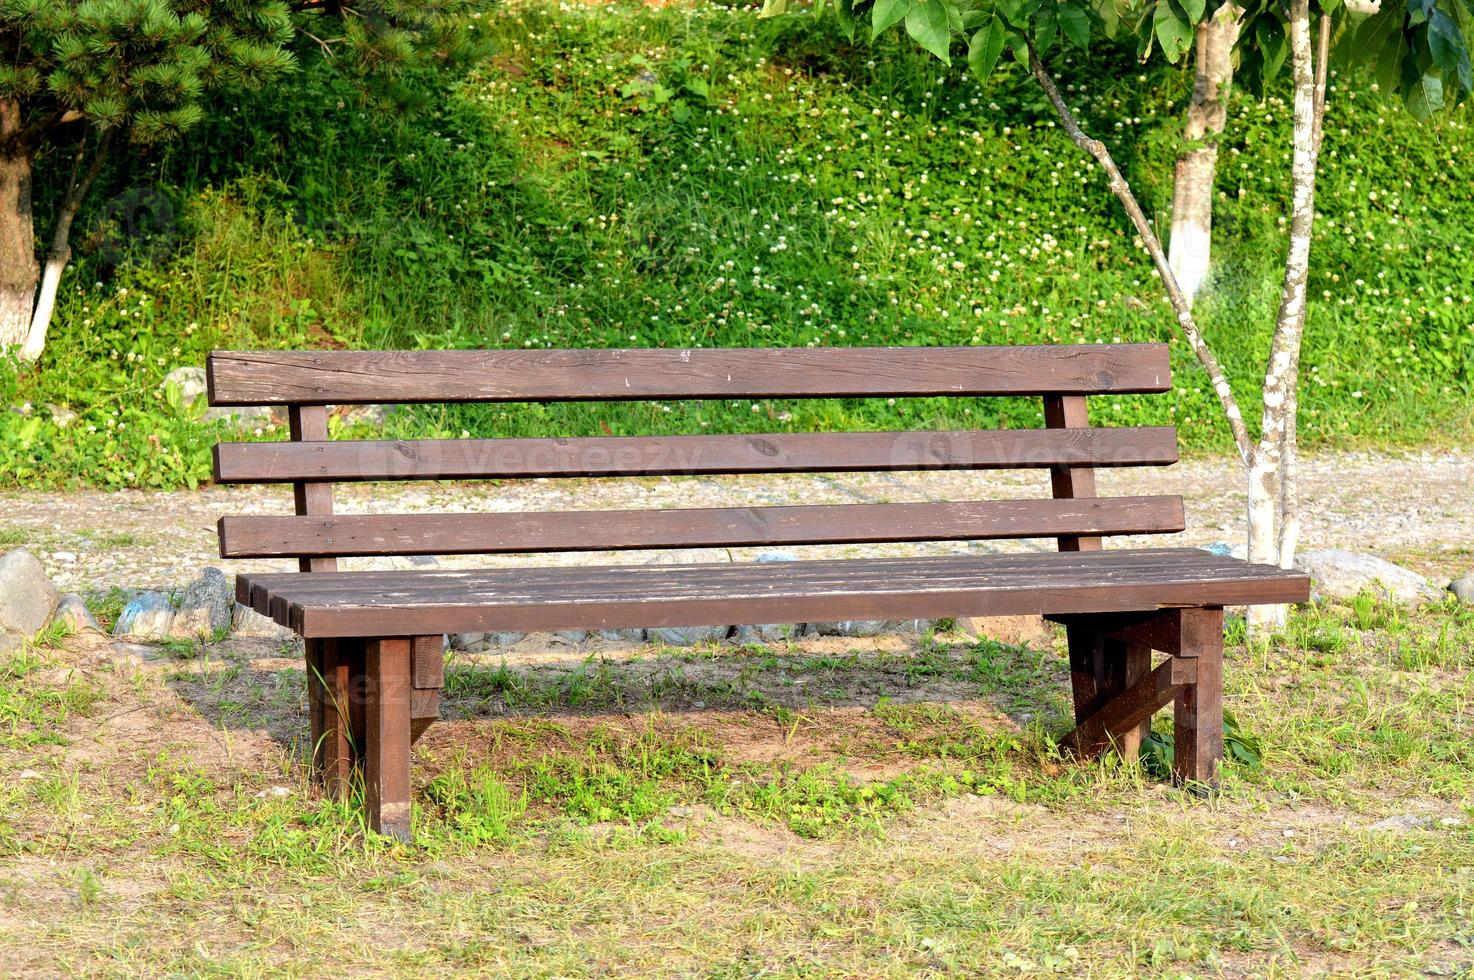 Brown wooden bench in the park. Summer sunny day. Green grass and trees. Resting and relaxing area. Empty bench for sitting. Wood exterior material. photo